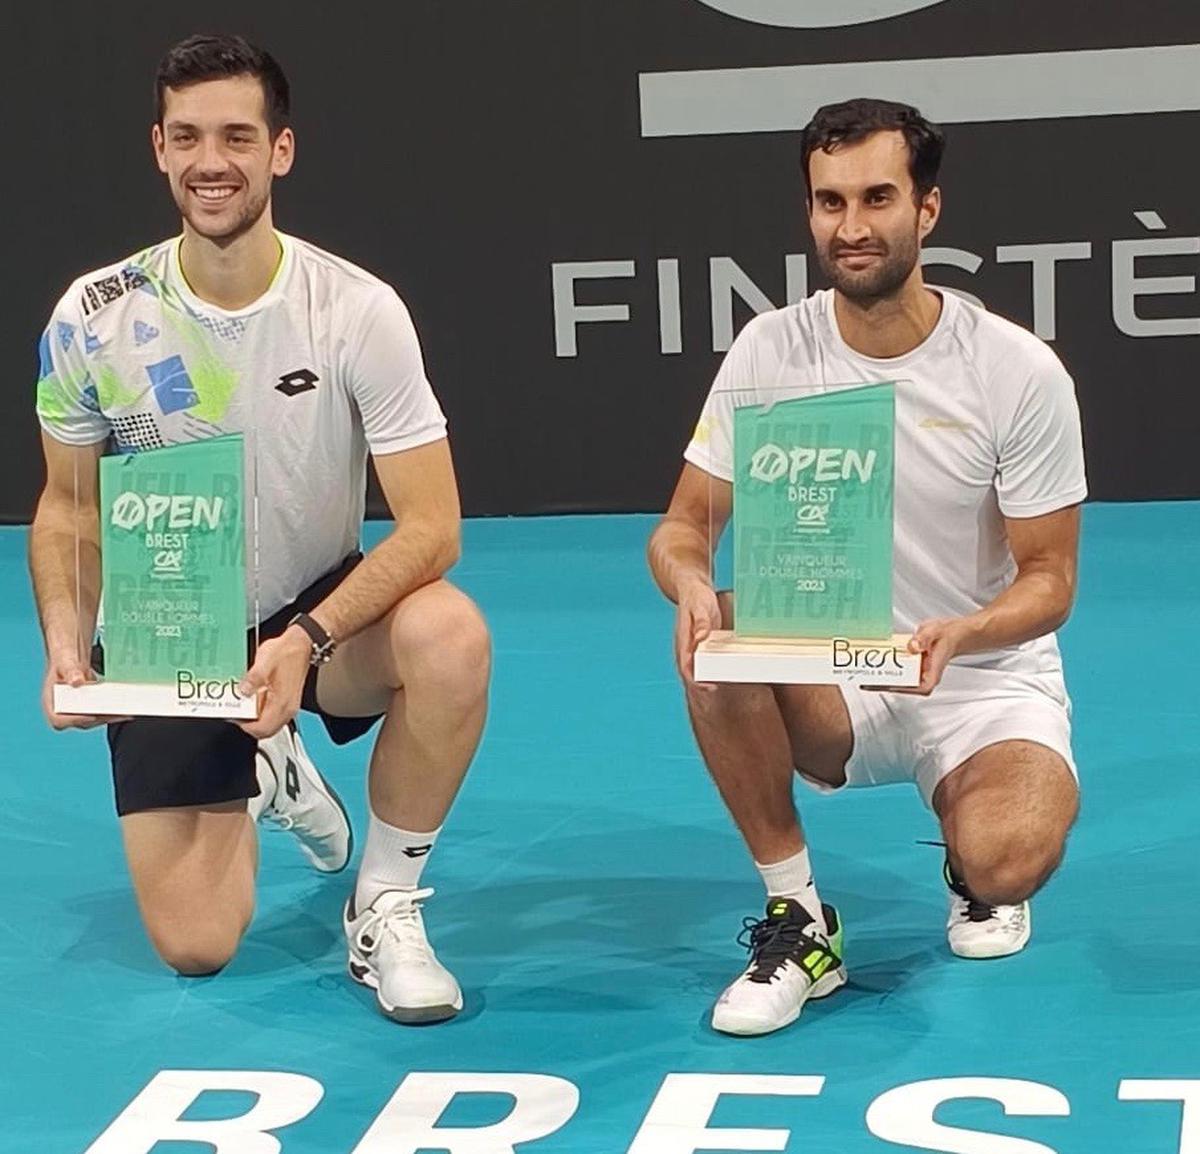 Julian Cash (left) and Yuki Bhambri (right) won the doubles title at the ATP Challenger event in Brest, France, on Sunday.